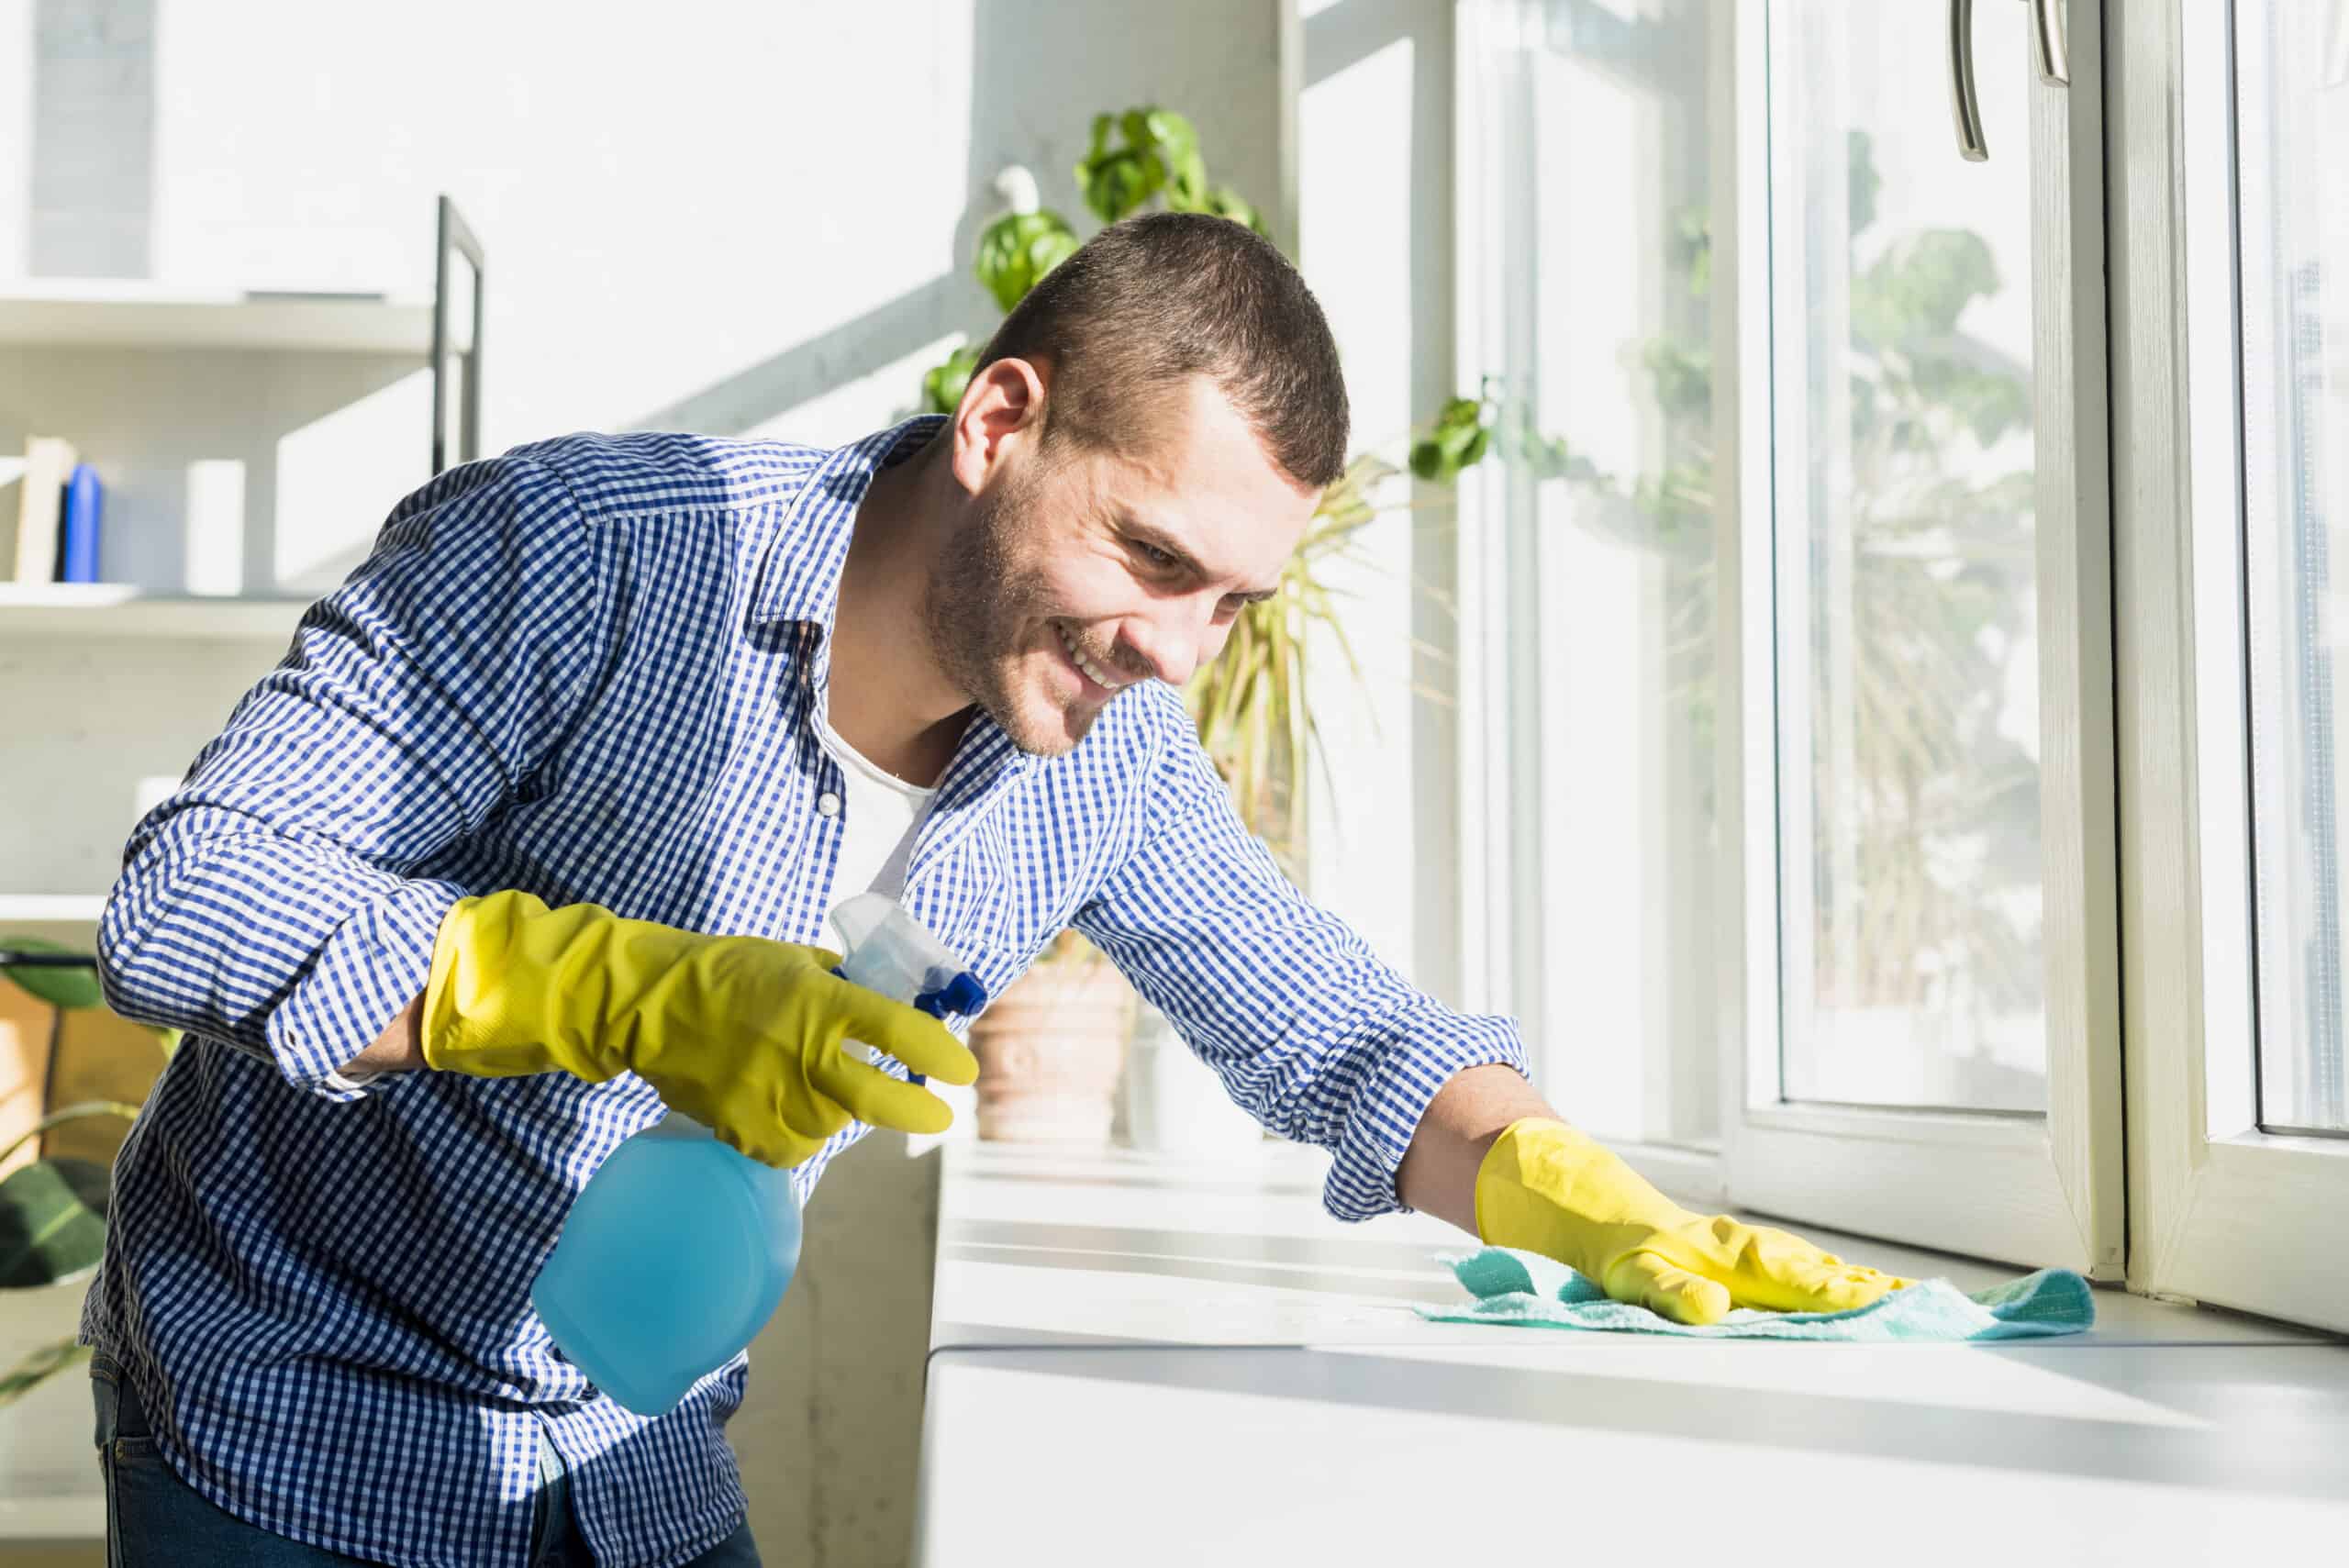 What are the benefits of Bond cleaning services?